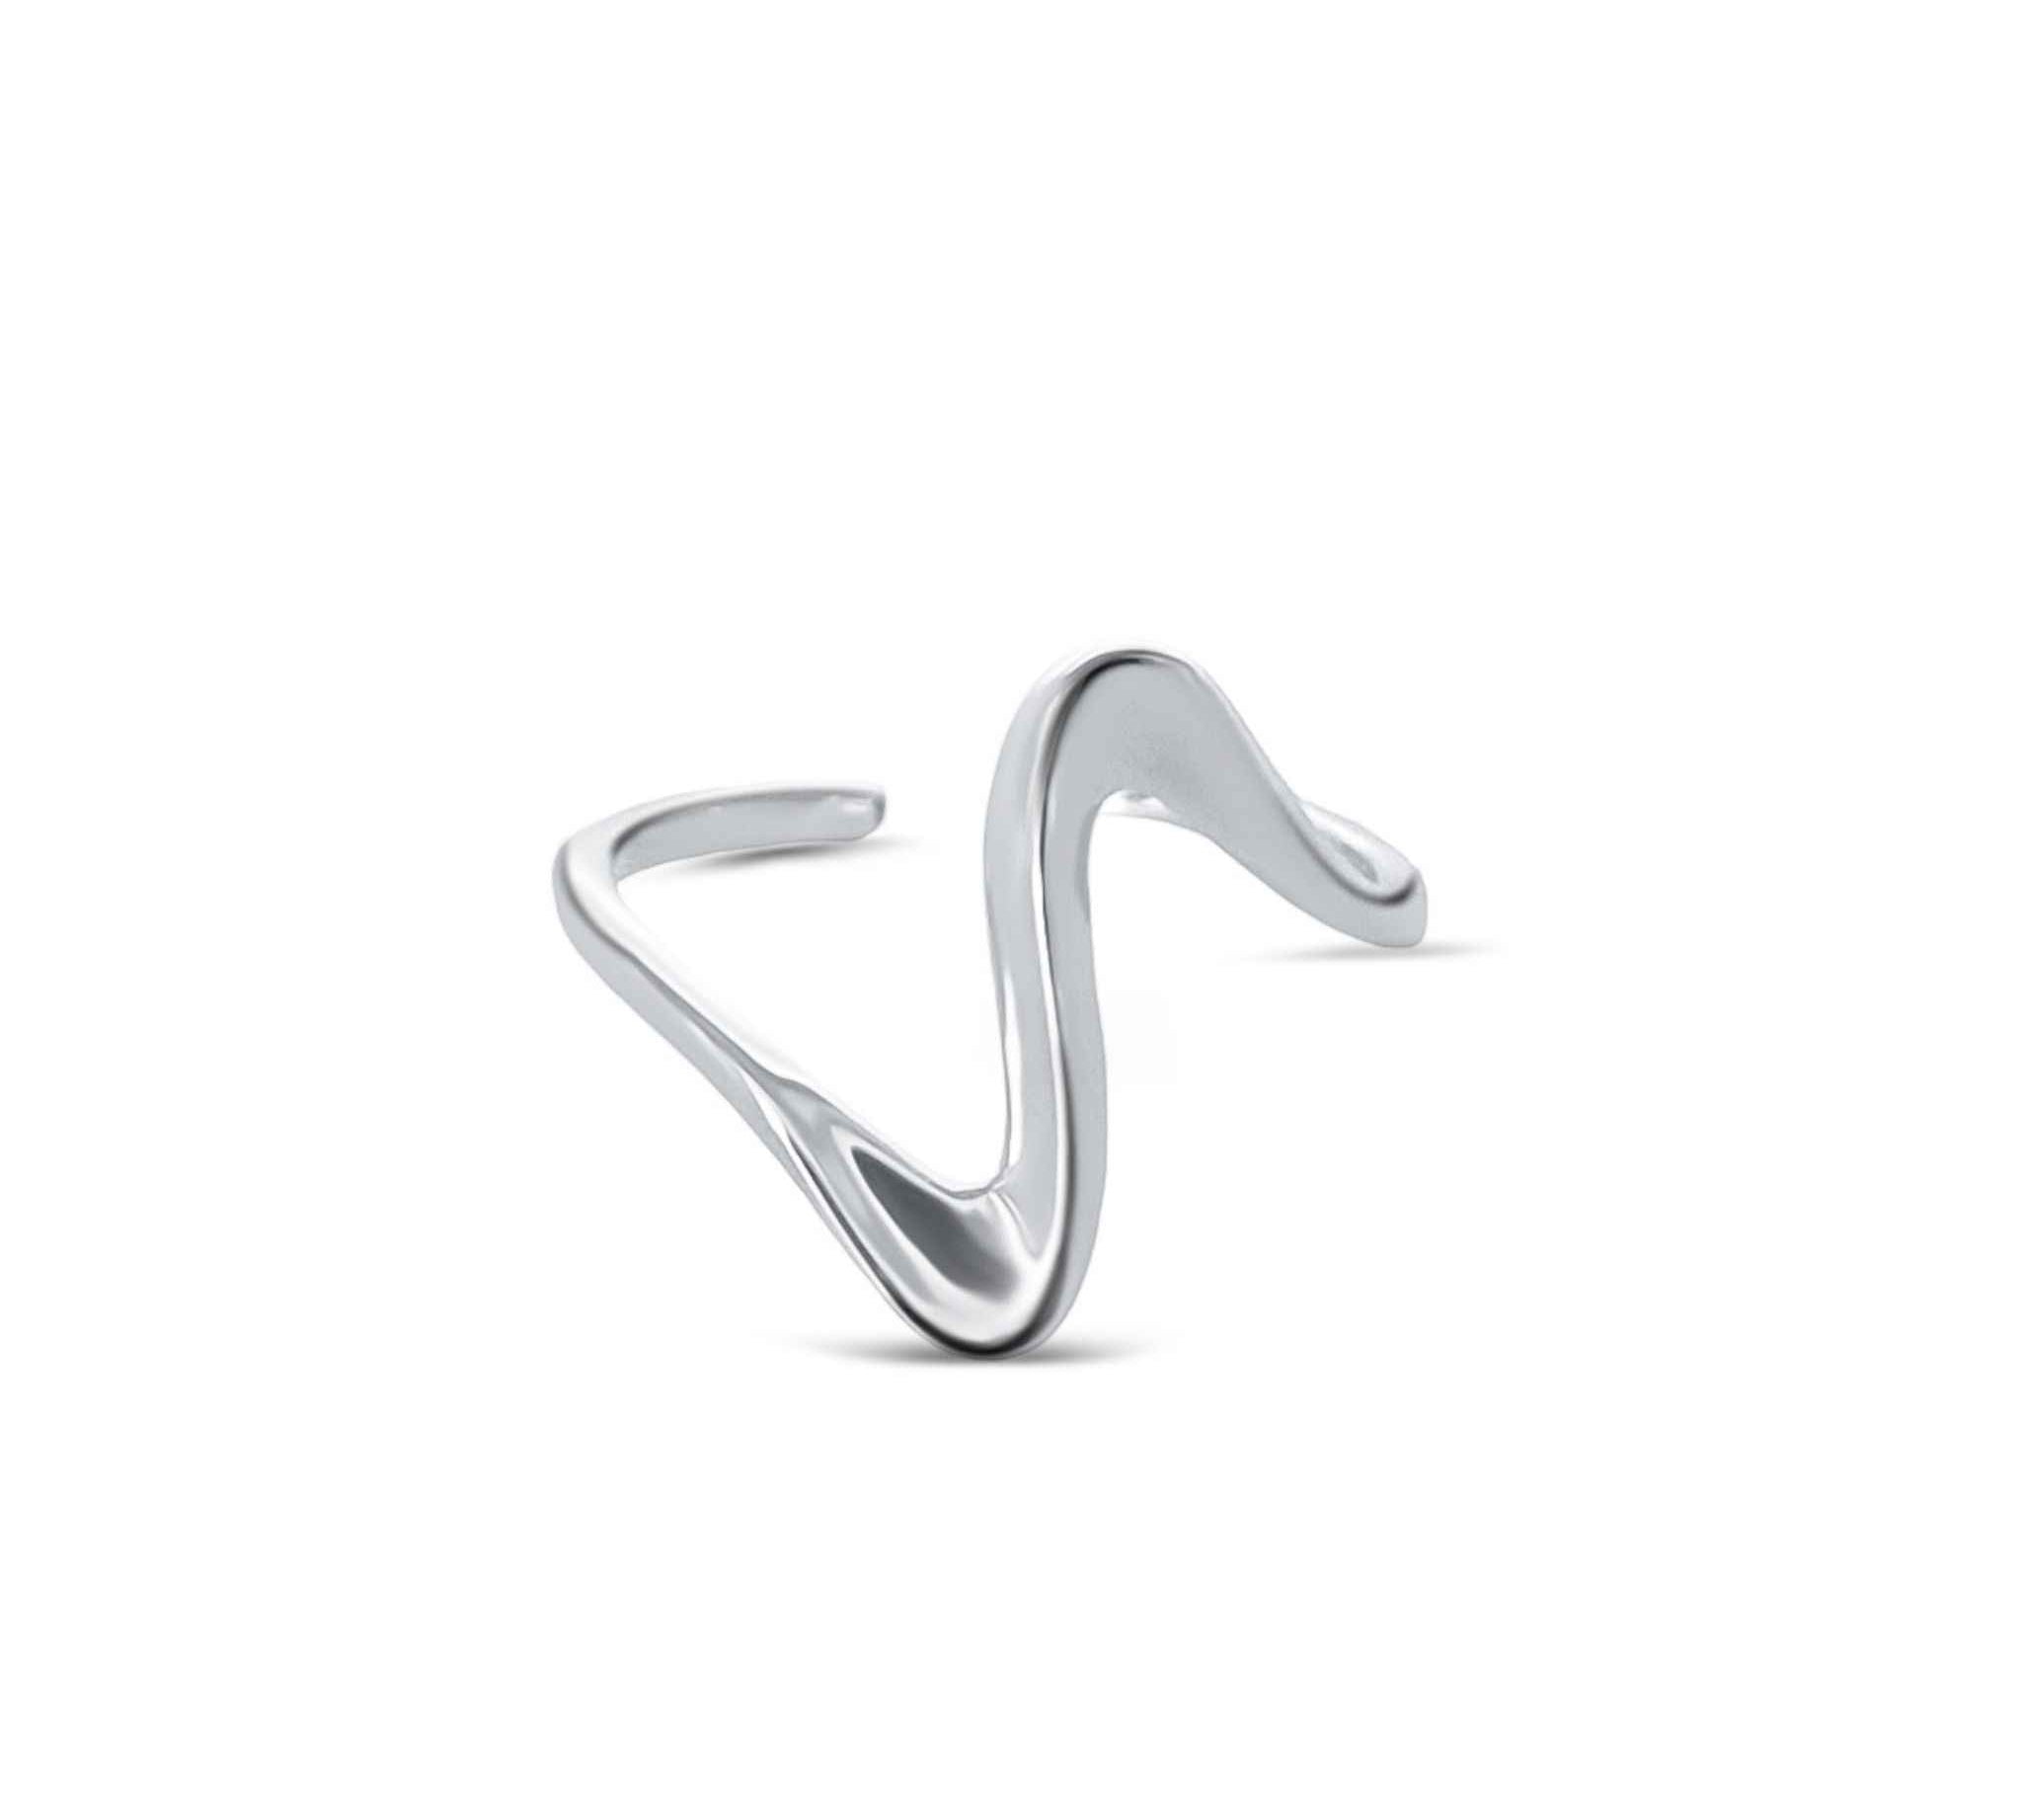 Alessandra James sterling silver Zig Zag Ring, perfect for everyday wear. Delicate and dainty adjustable ring design.